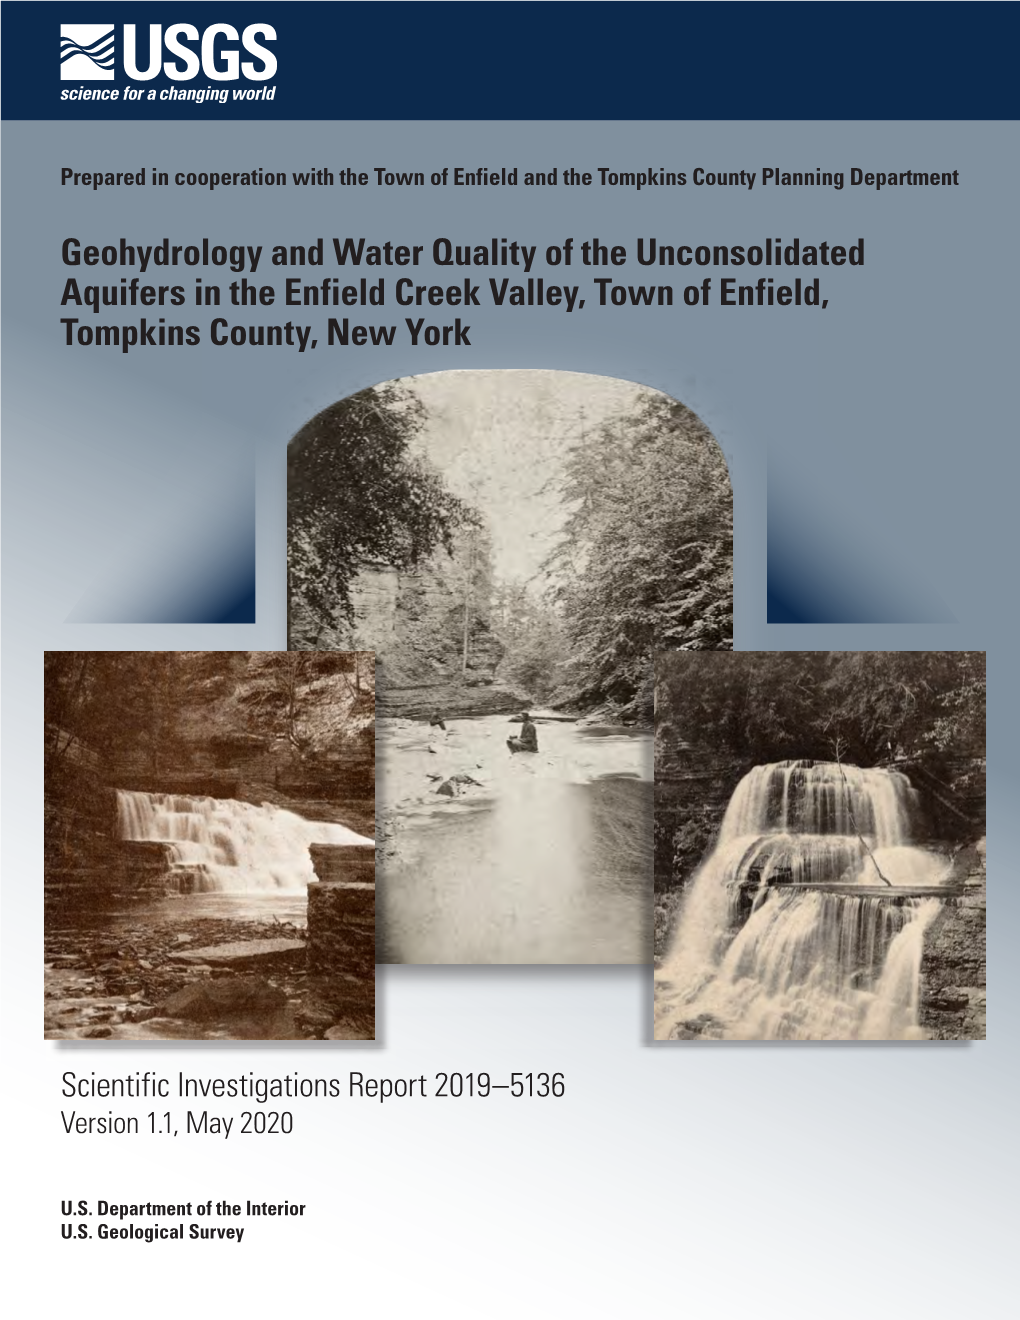 Geohydrology and Water Quality of the Unconsolidated Aquifers in the Enfield Creek Valley, Town of Enfield, Tompkins County, New York